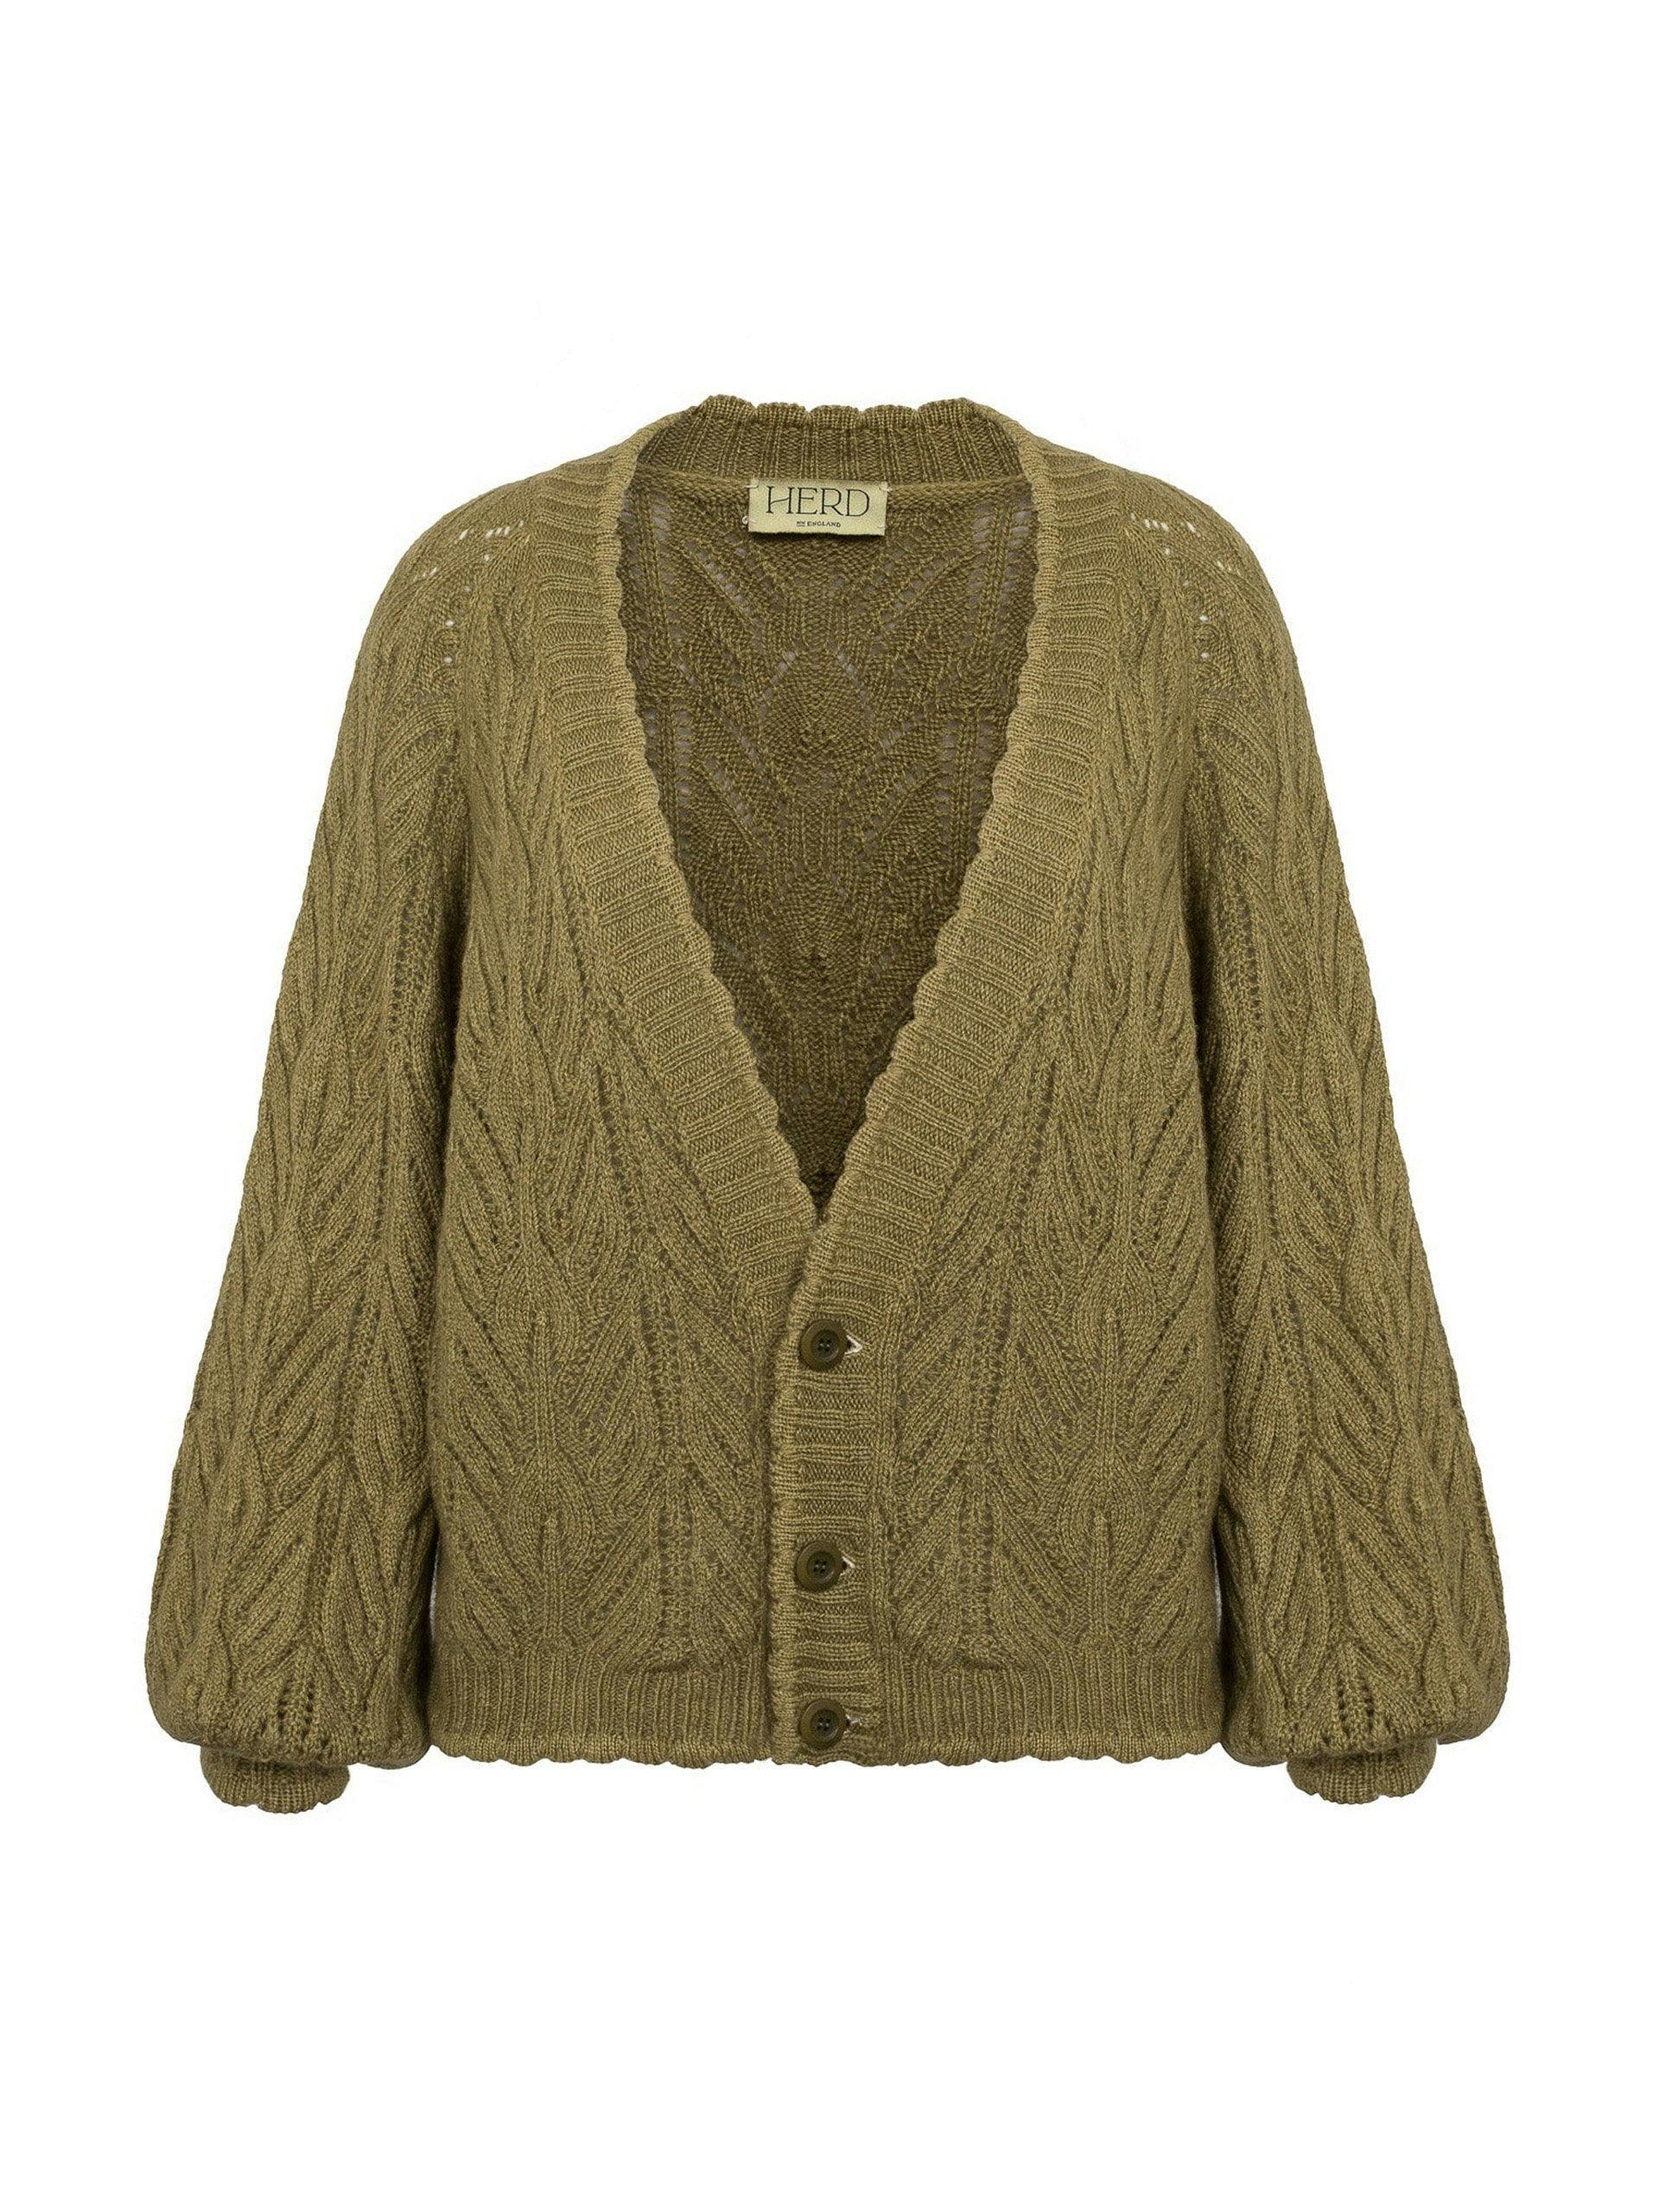 Green knitted Wyre cardigan